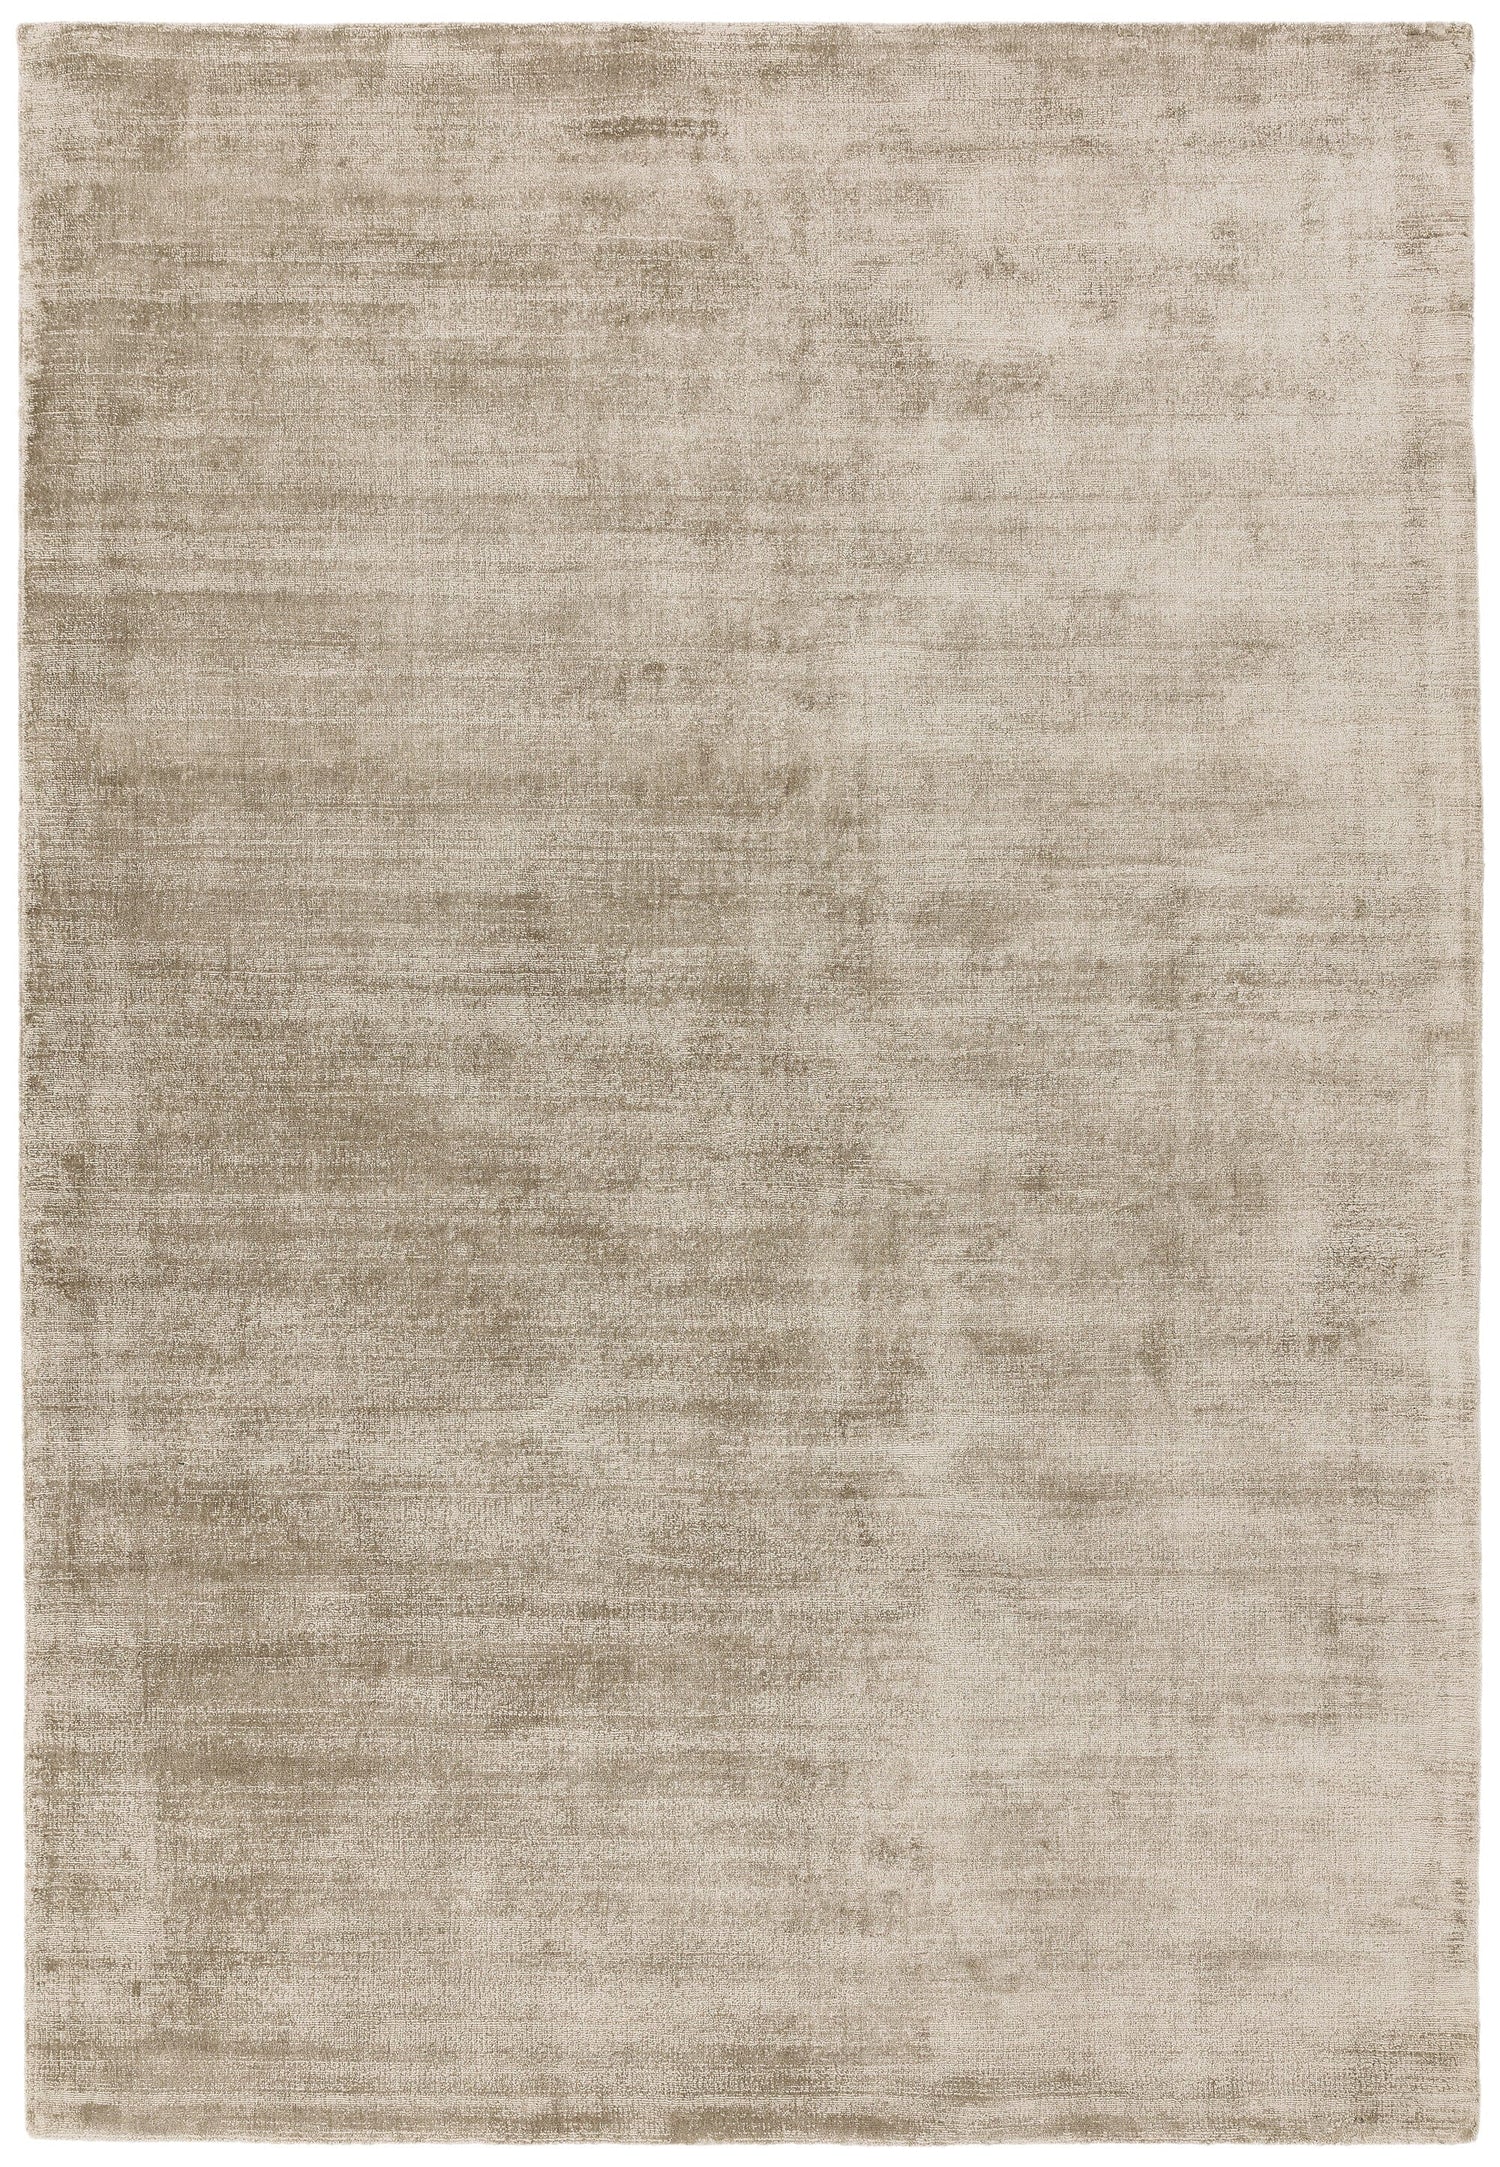  Asiatic Carpets-Asiatic Carpets Blade Hand Woven Rug Smoke - 160 x 230cm-Grey, Silver 389 